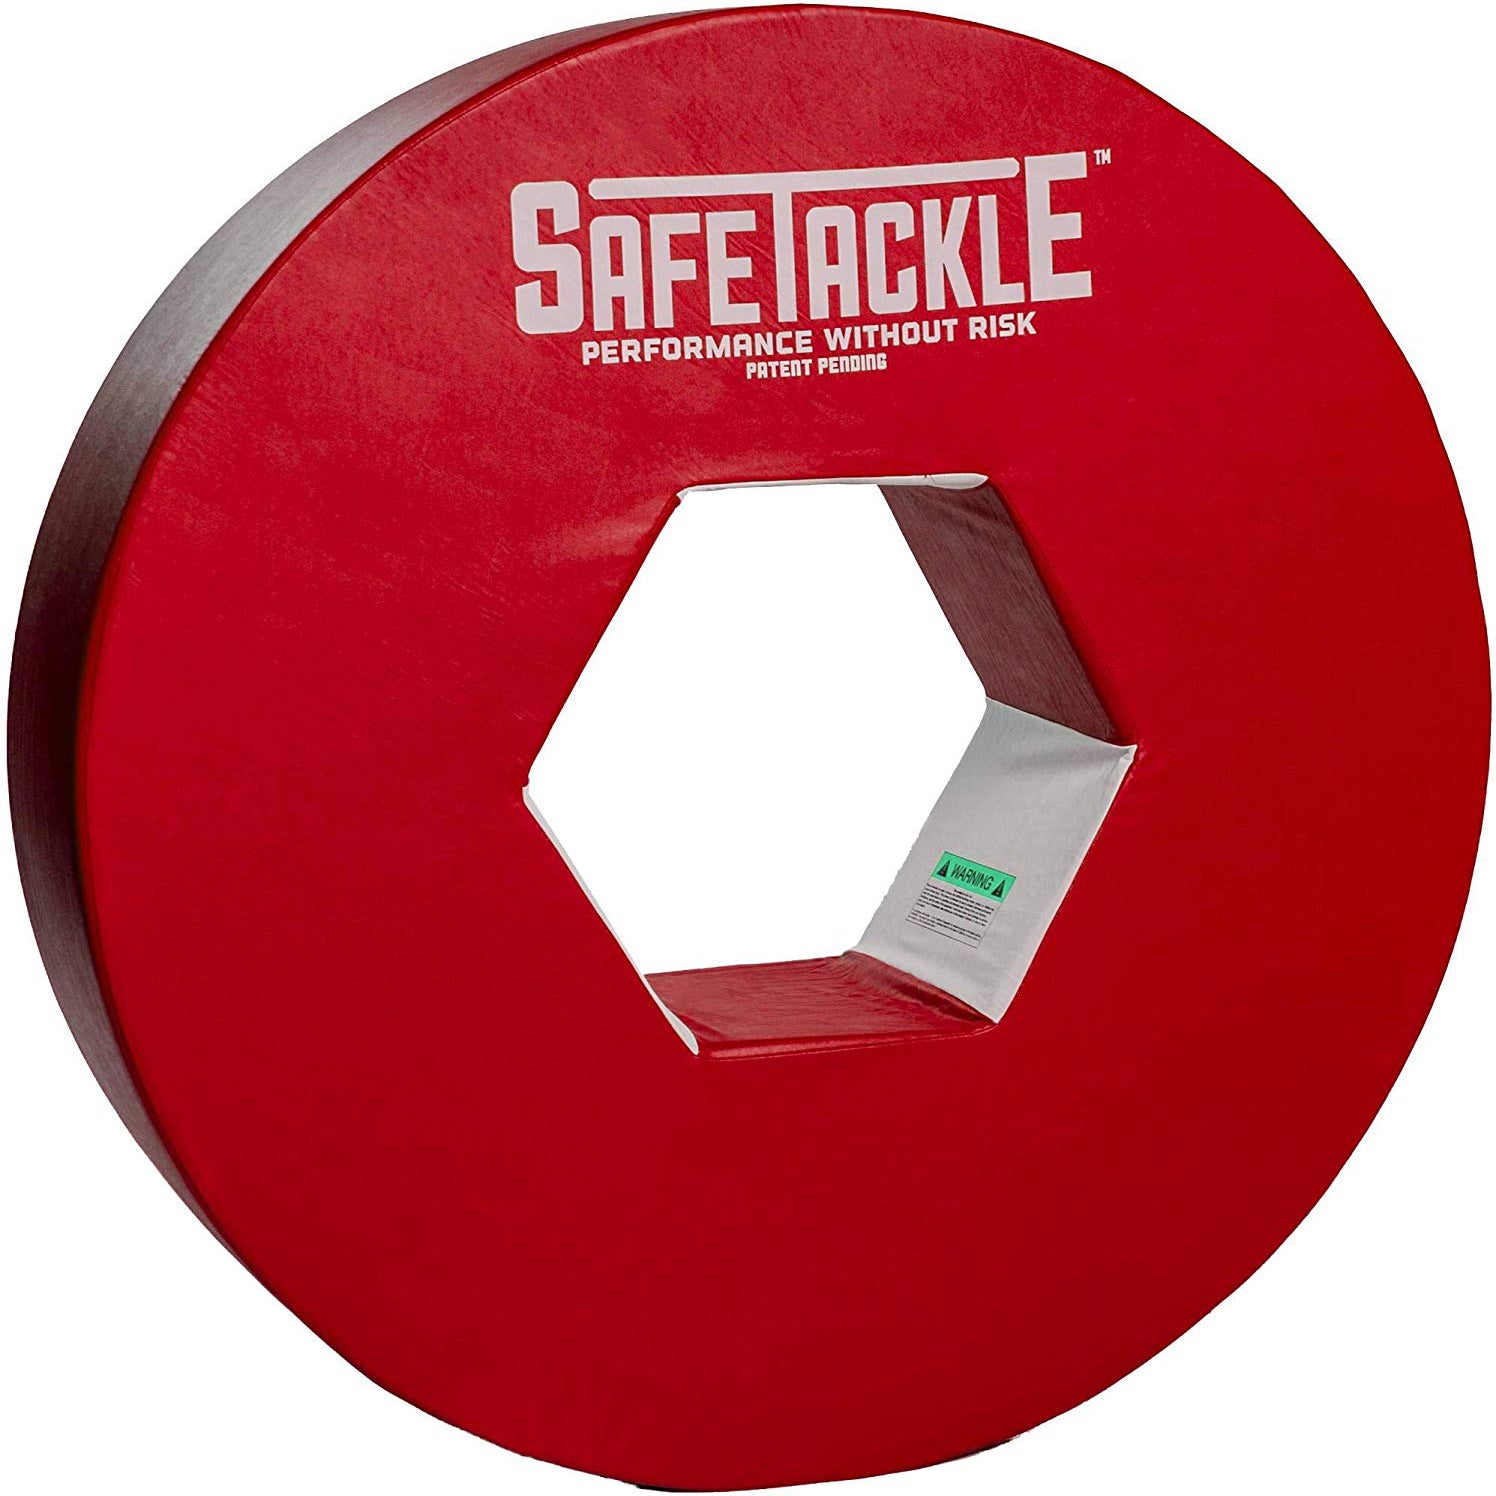 SafeTackle 40-Inch Diameter Pro Football Training Tackle Ring Size Pro, Red